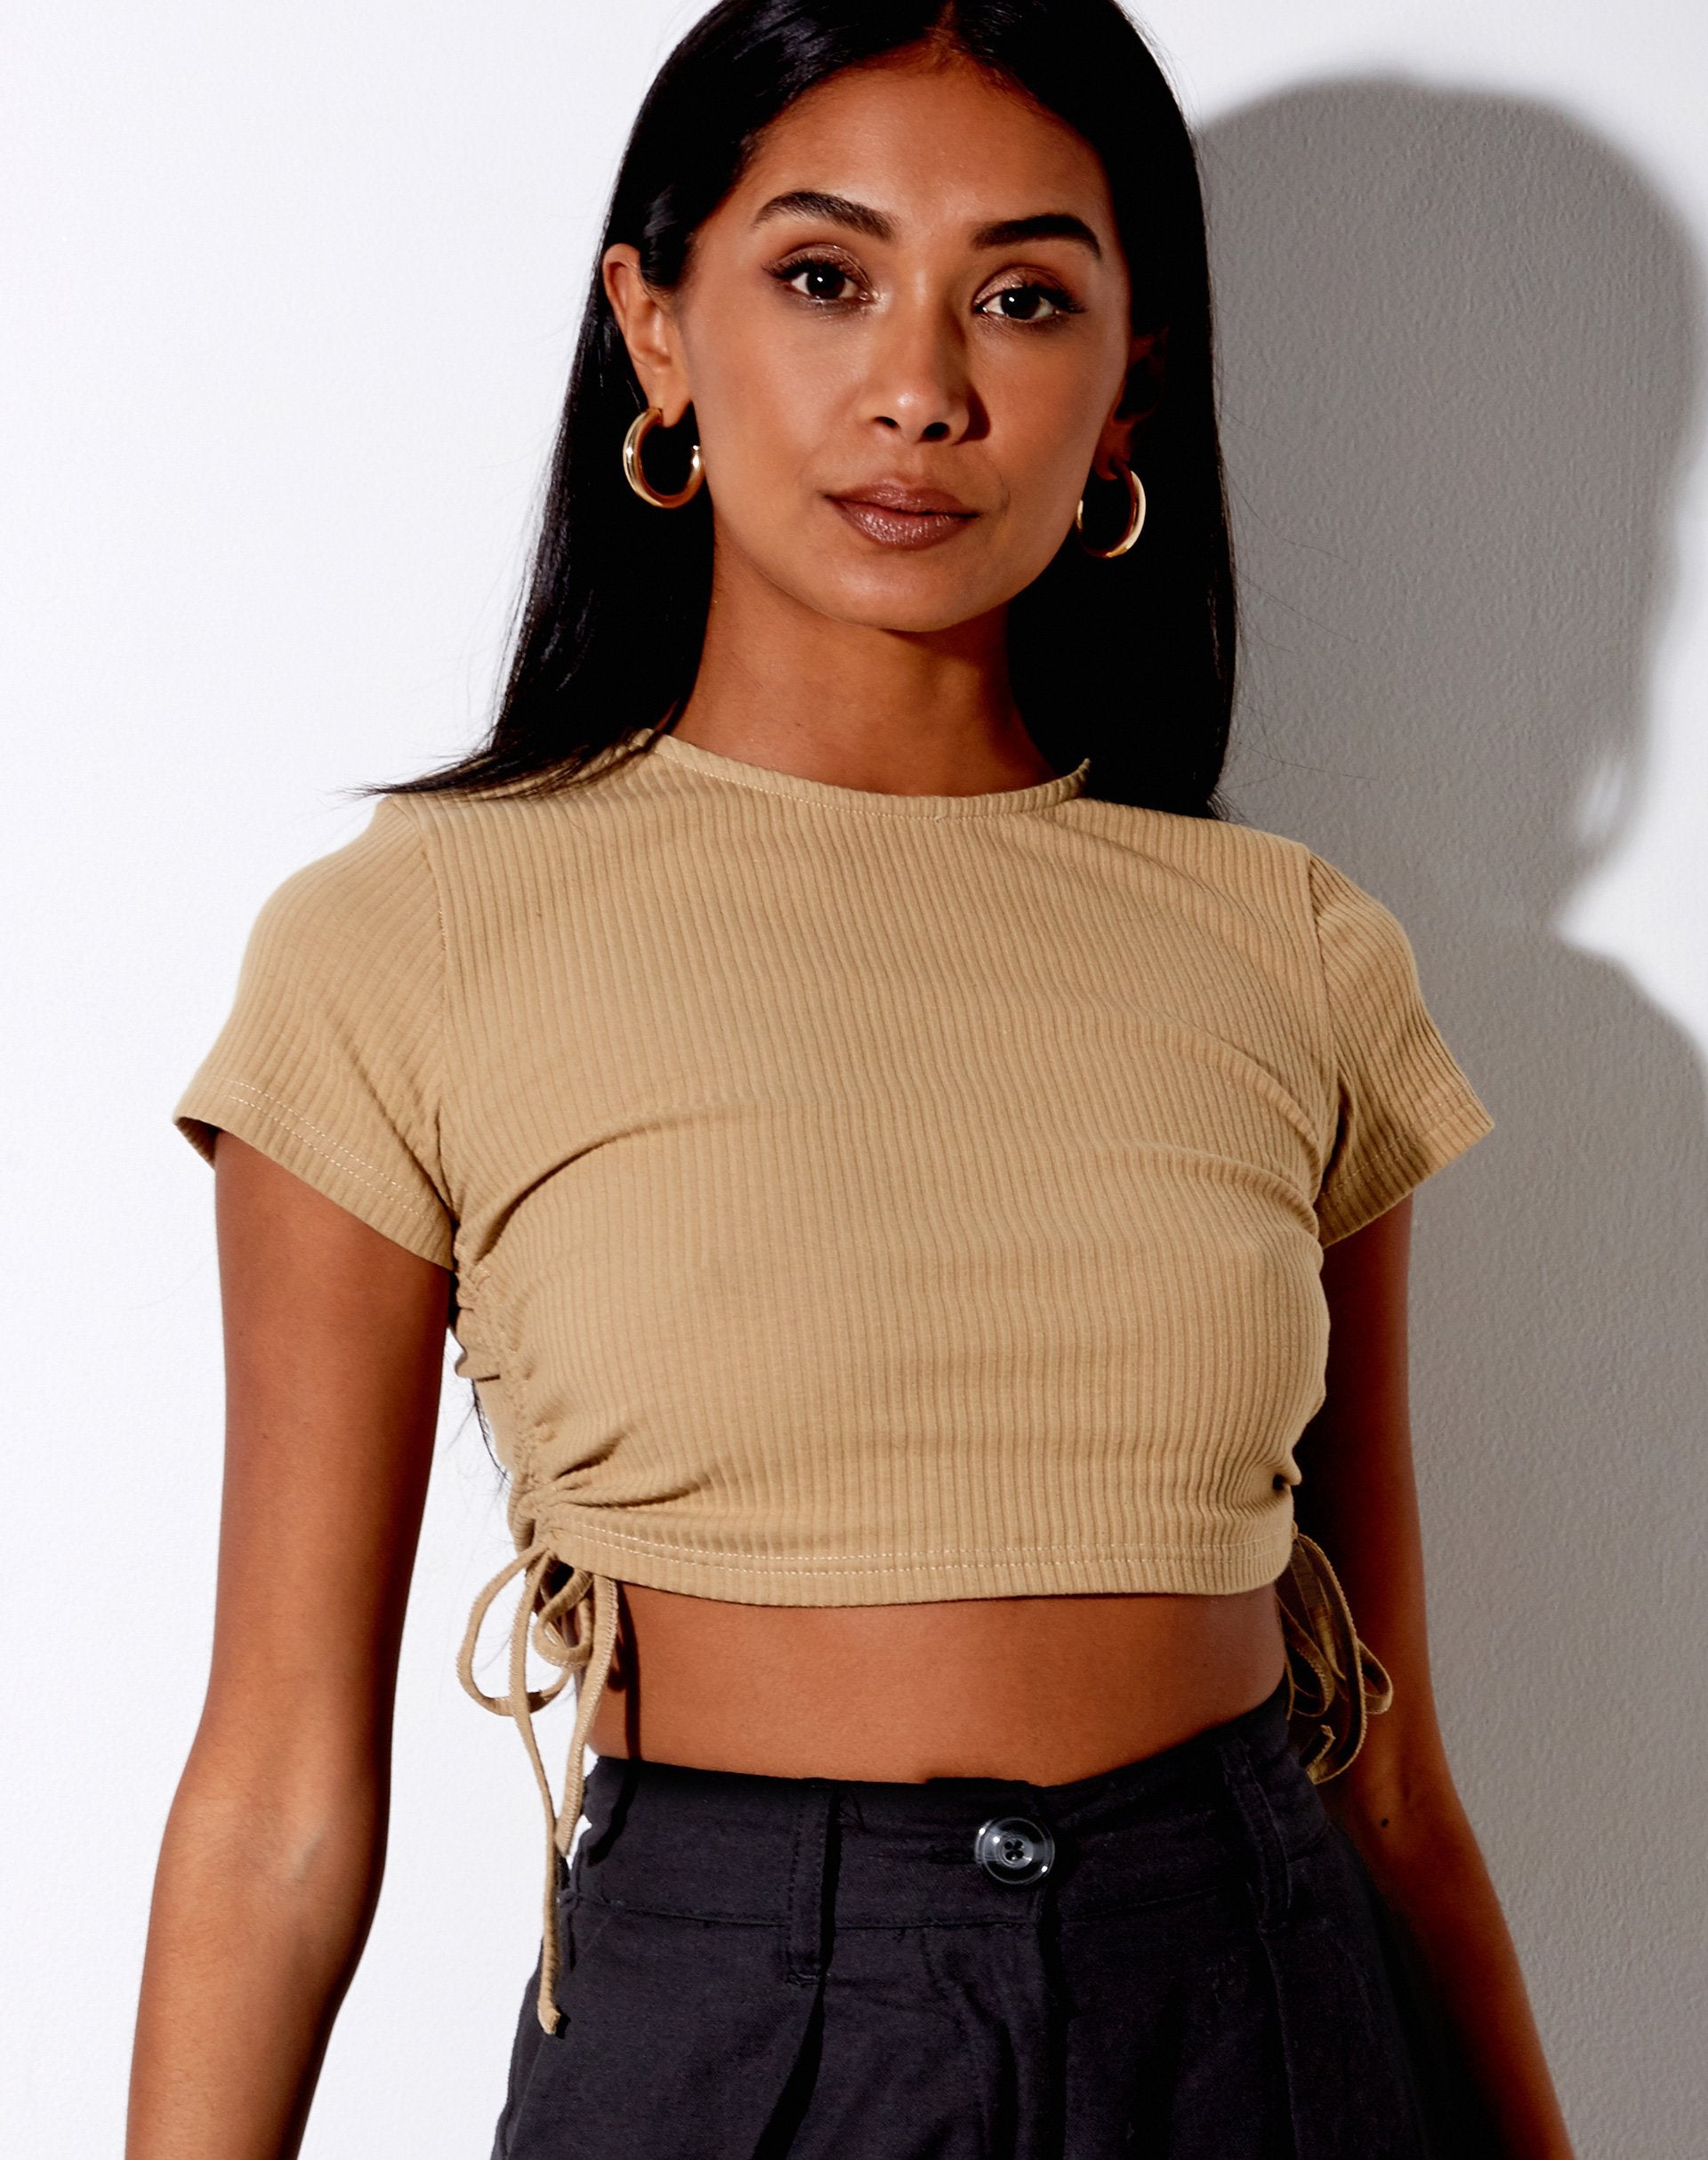 Image of Tiner Crop Top in Rib Cocoa